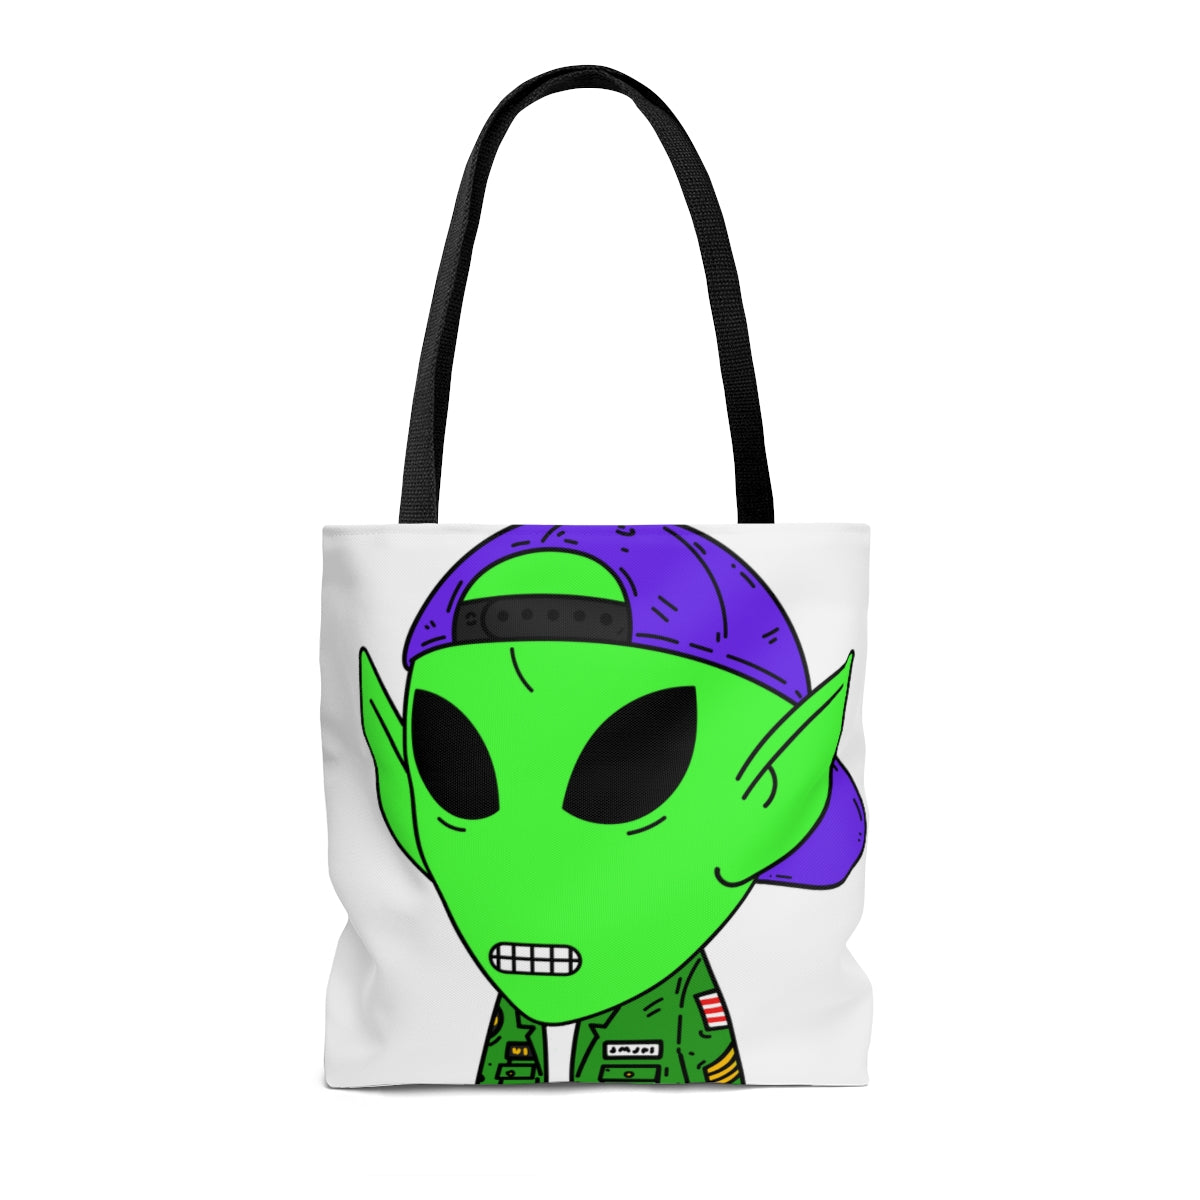 Green Military Army Jacket pointy ear Visitor Alien AOP Tote Bag